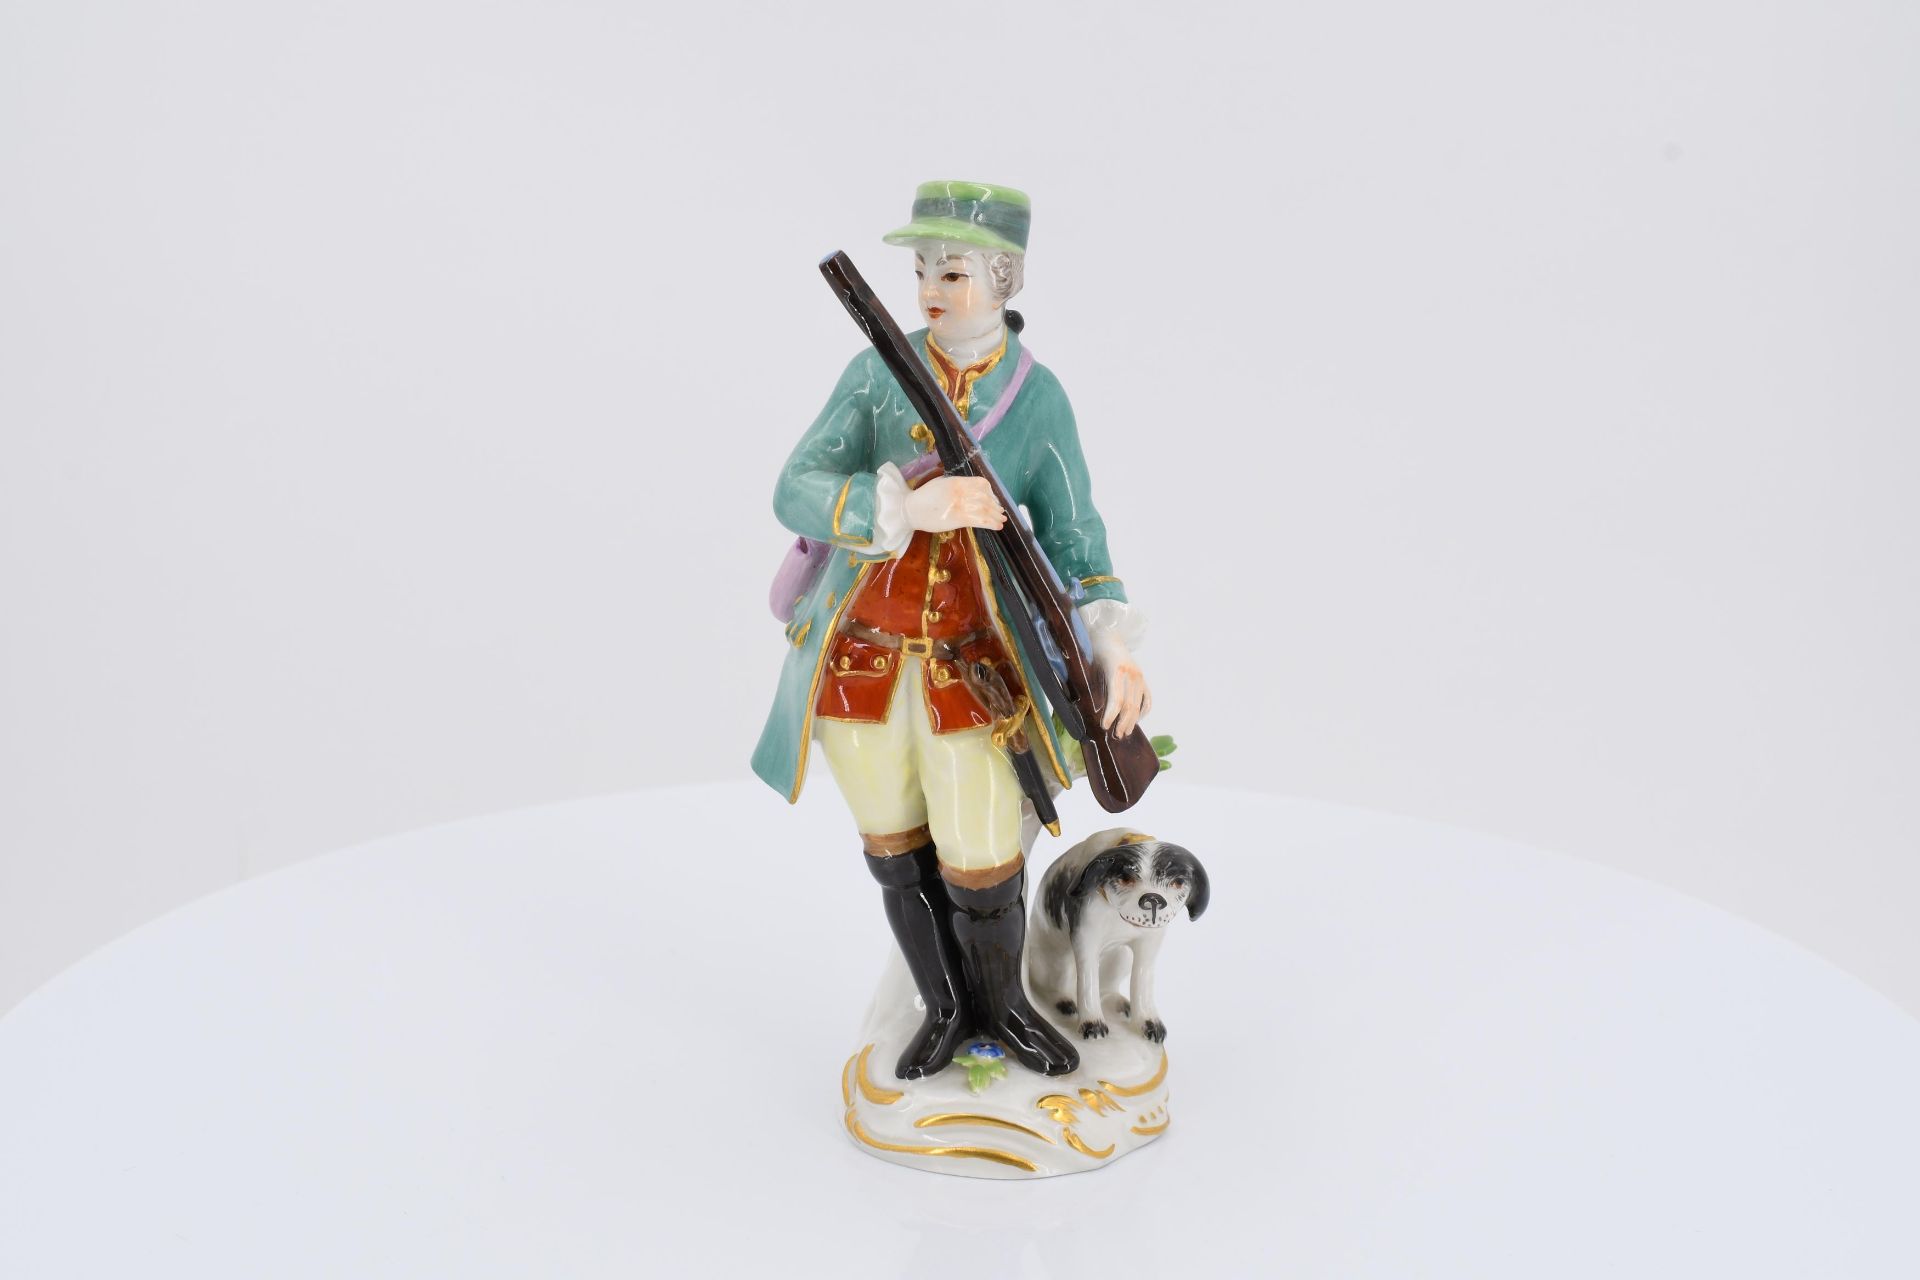 Porcelain figurine of hunter with musket and dog - Image 2 of 6